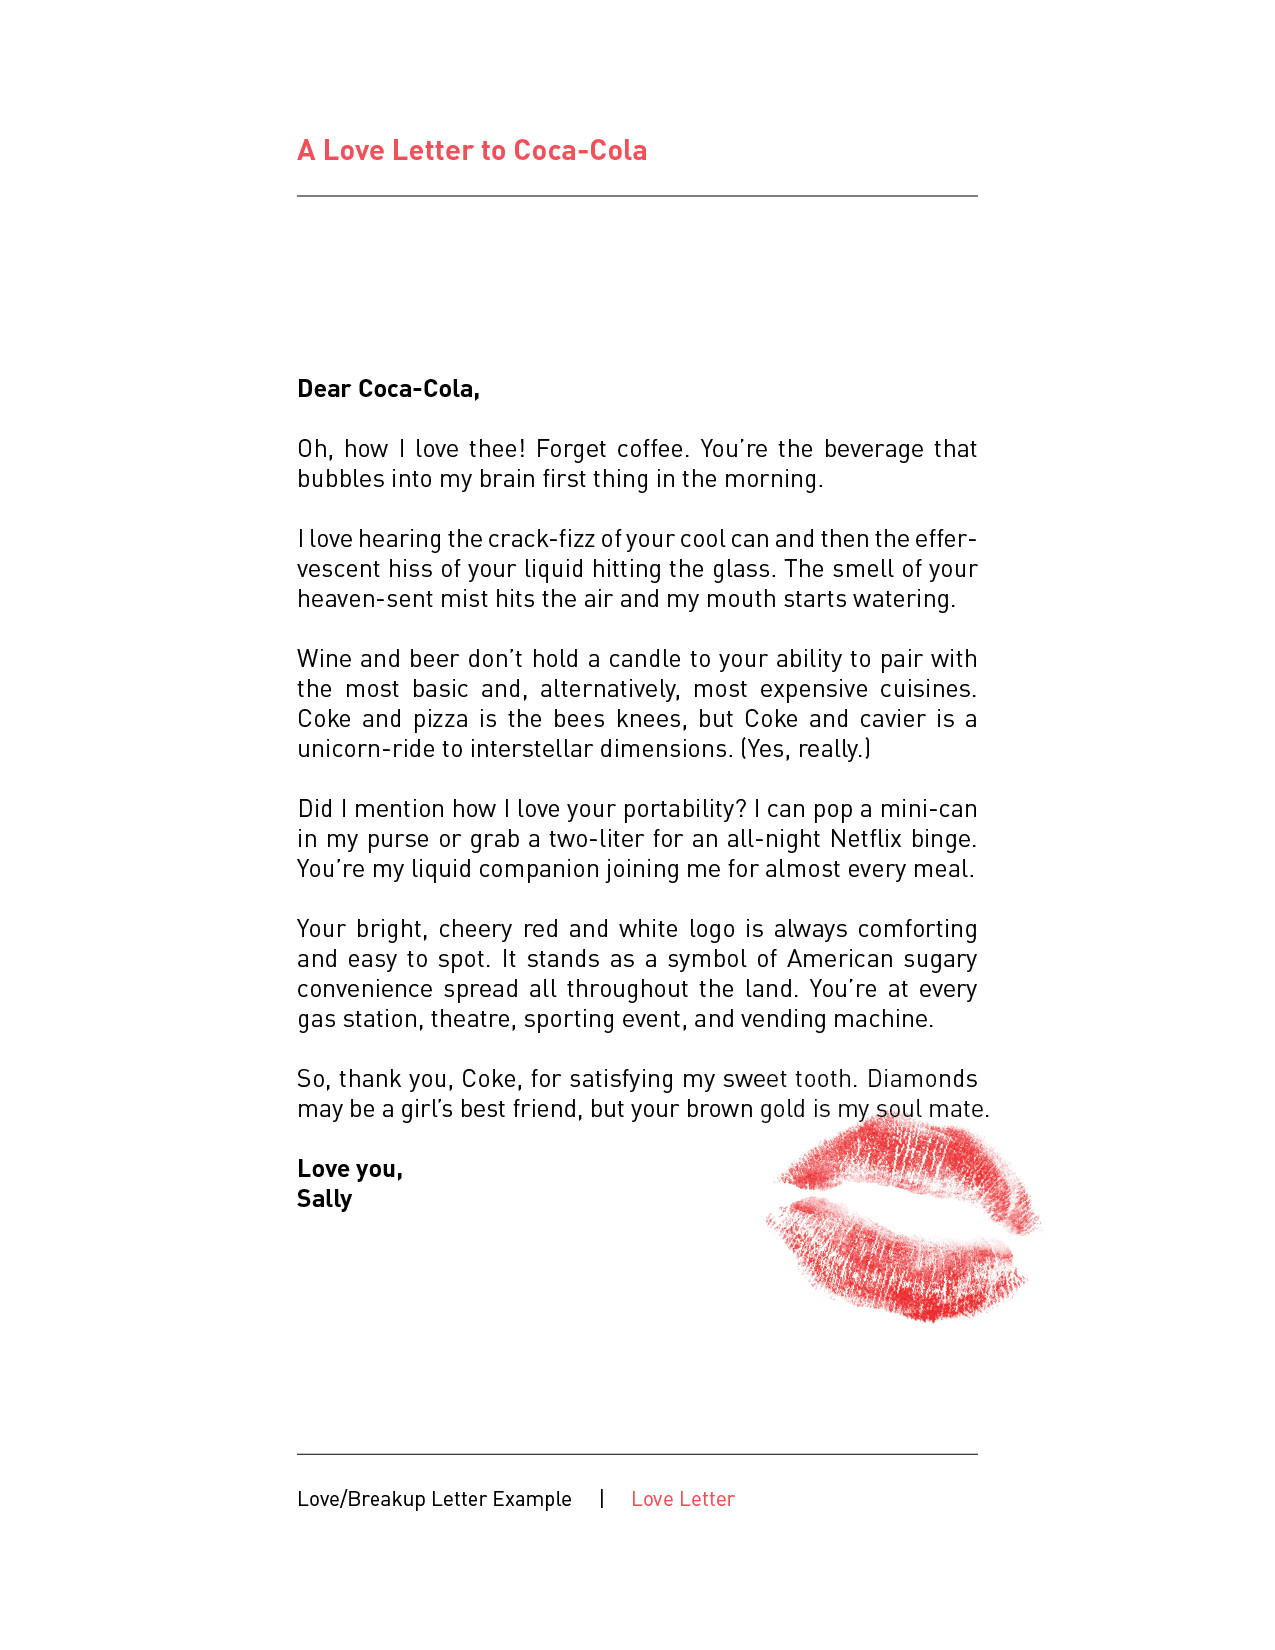 Design Thinking Activity 1 – The Love Breakup Letter